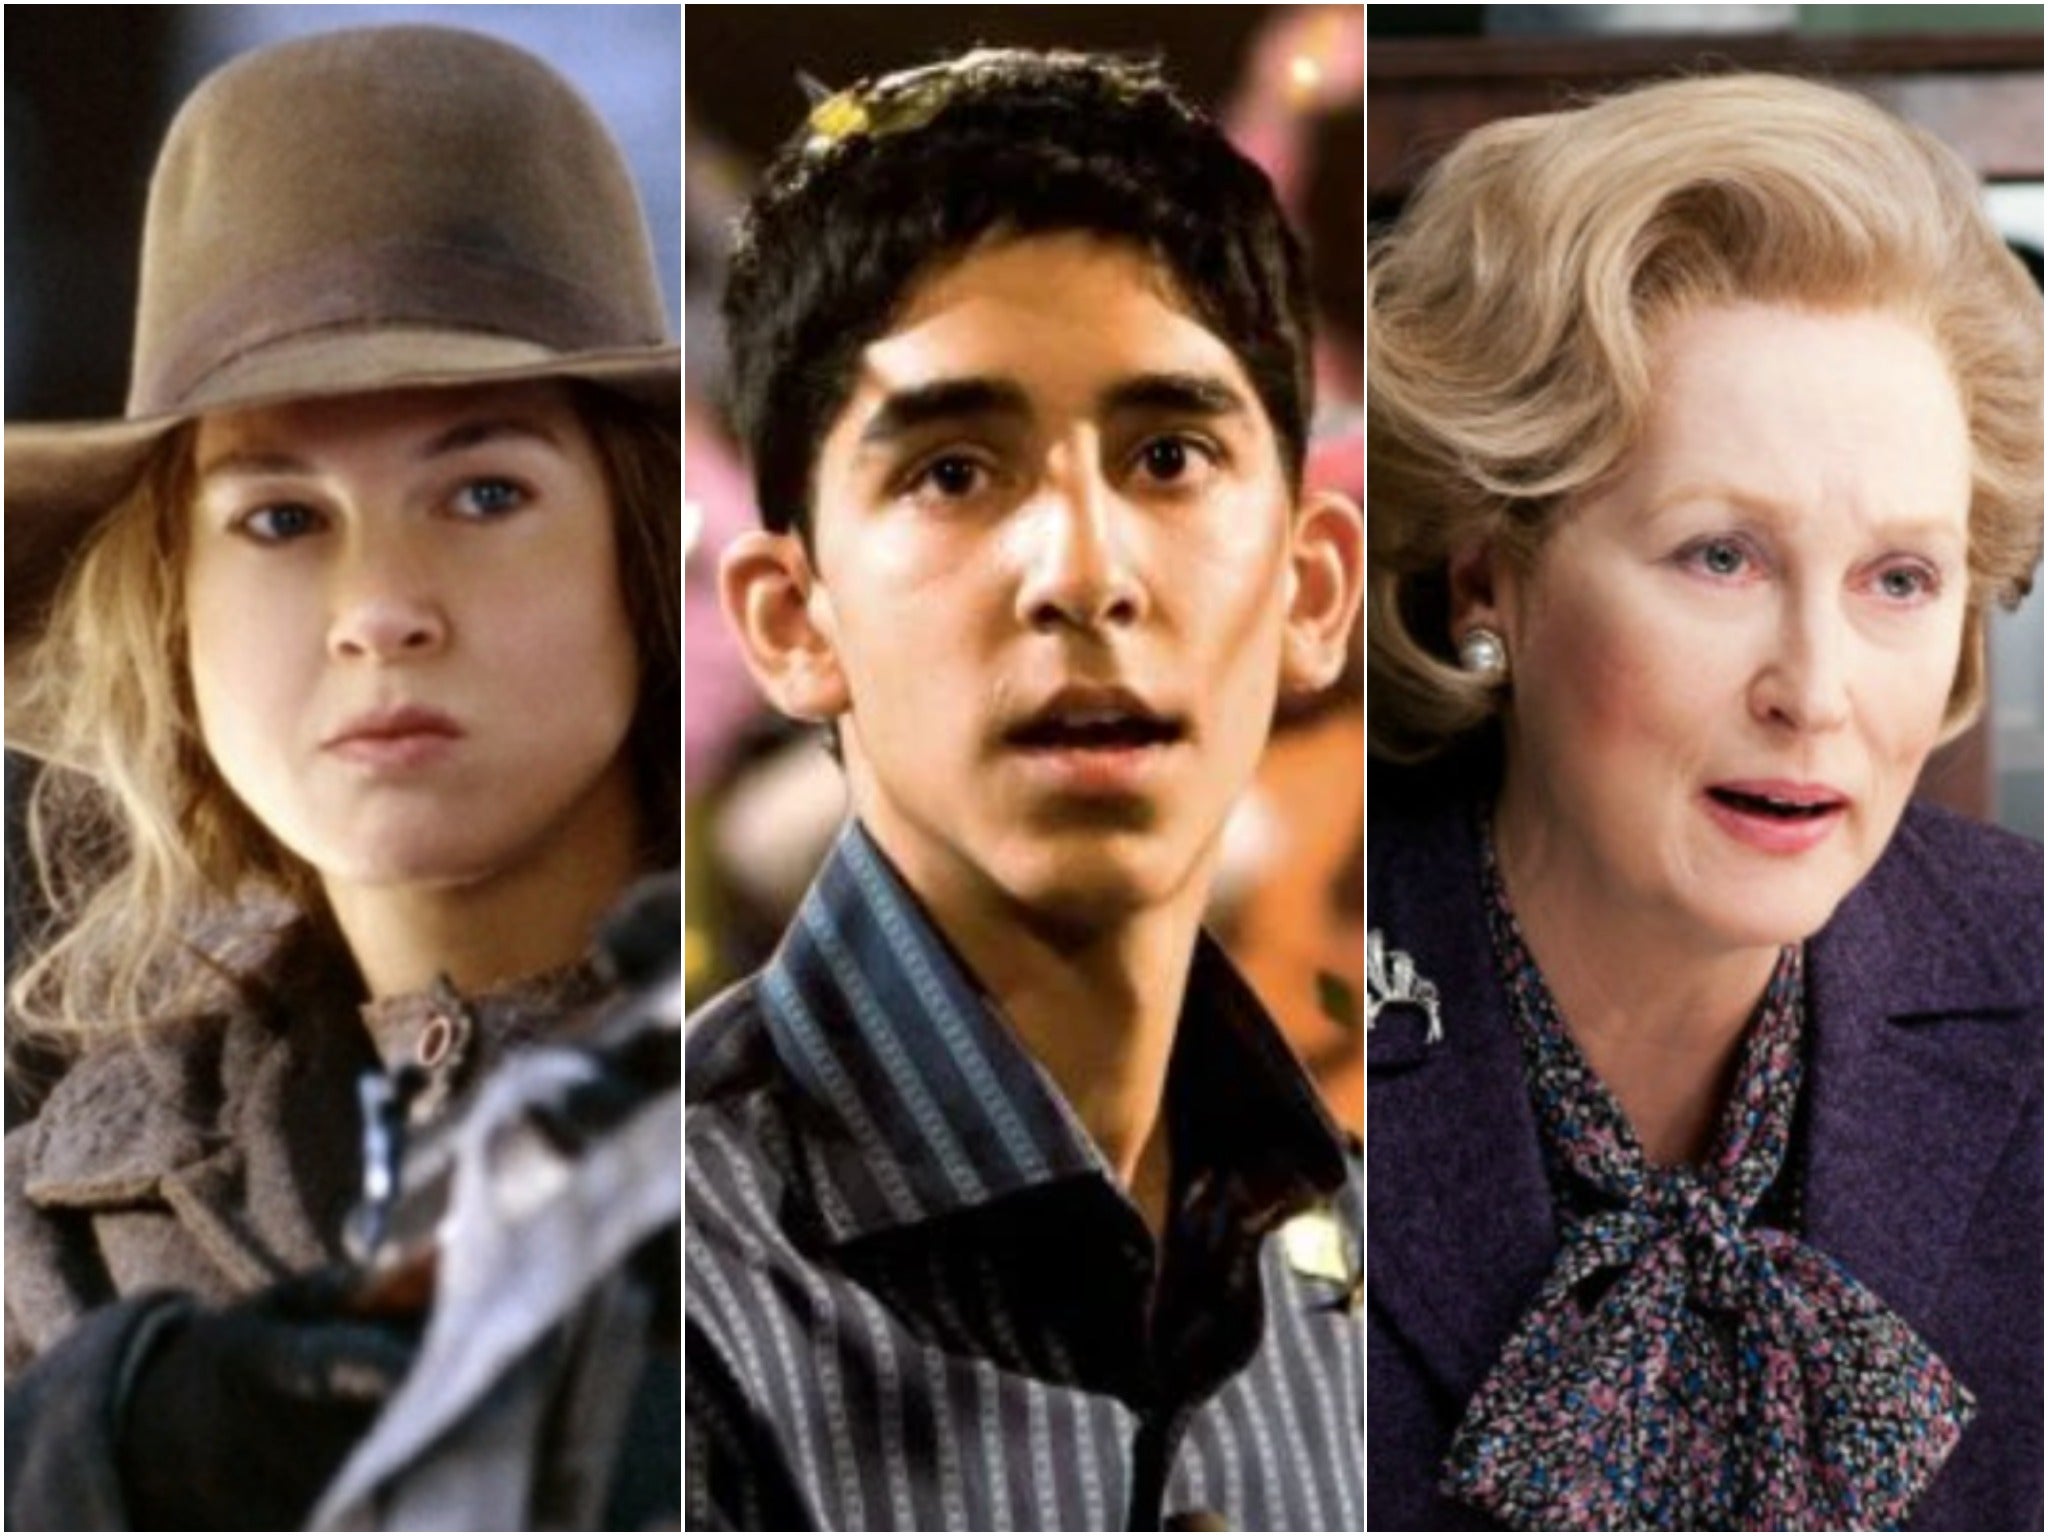 ‘Cold Mountain’, ‘Slumdog Millionaire’ and ‘The Iron Lady’ are three films that shouldn’t have won Oscars